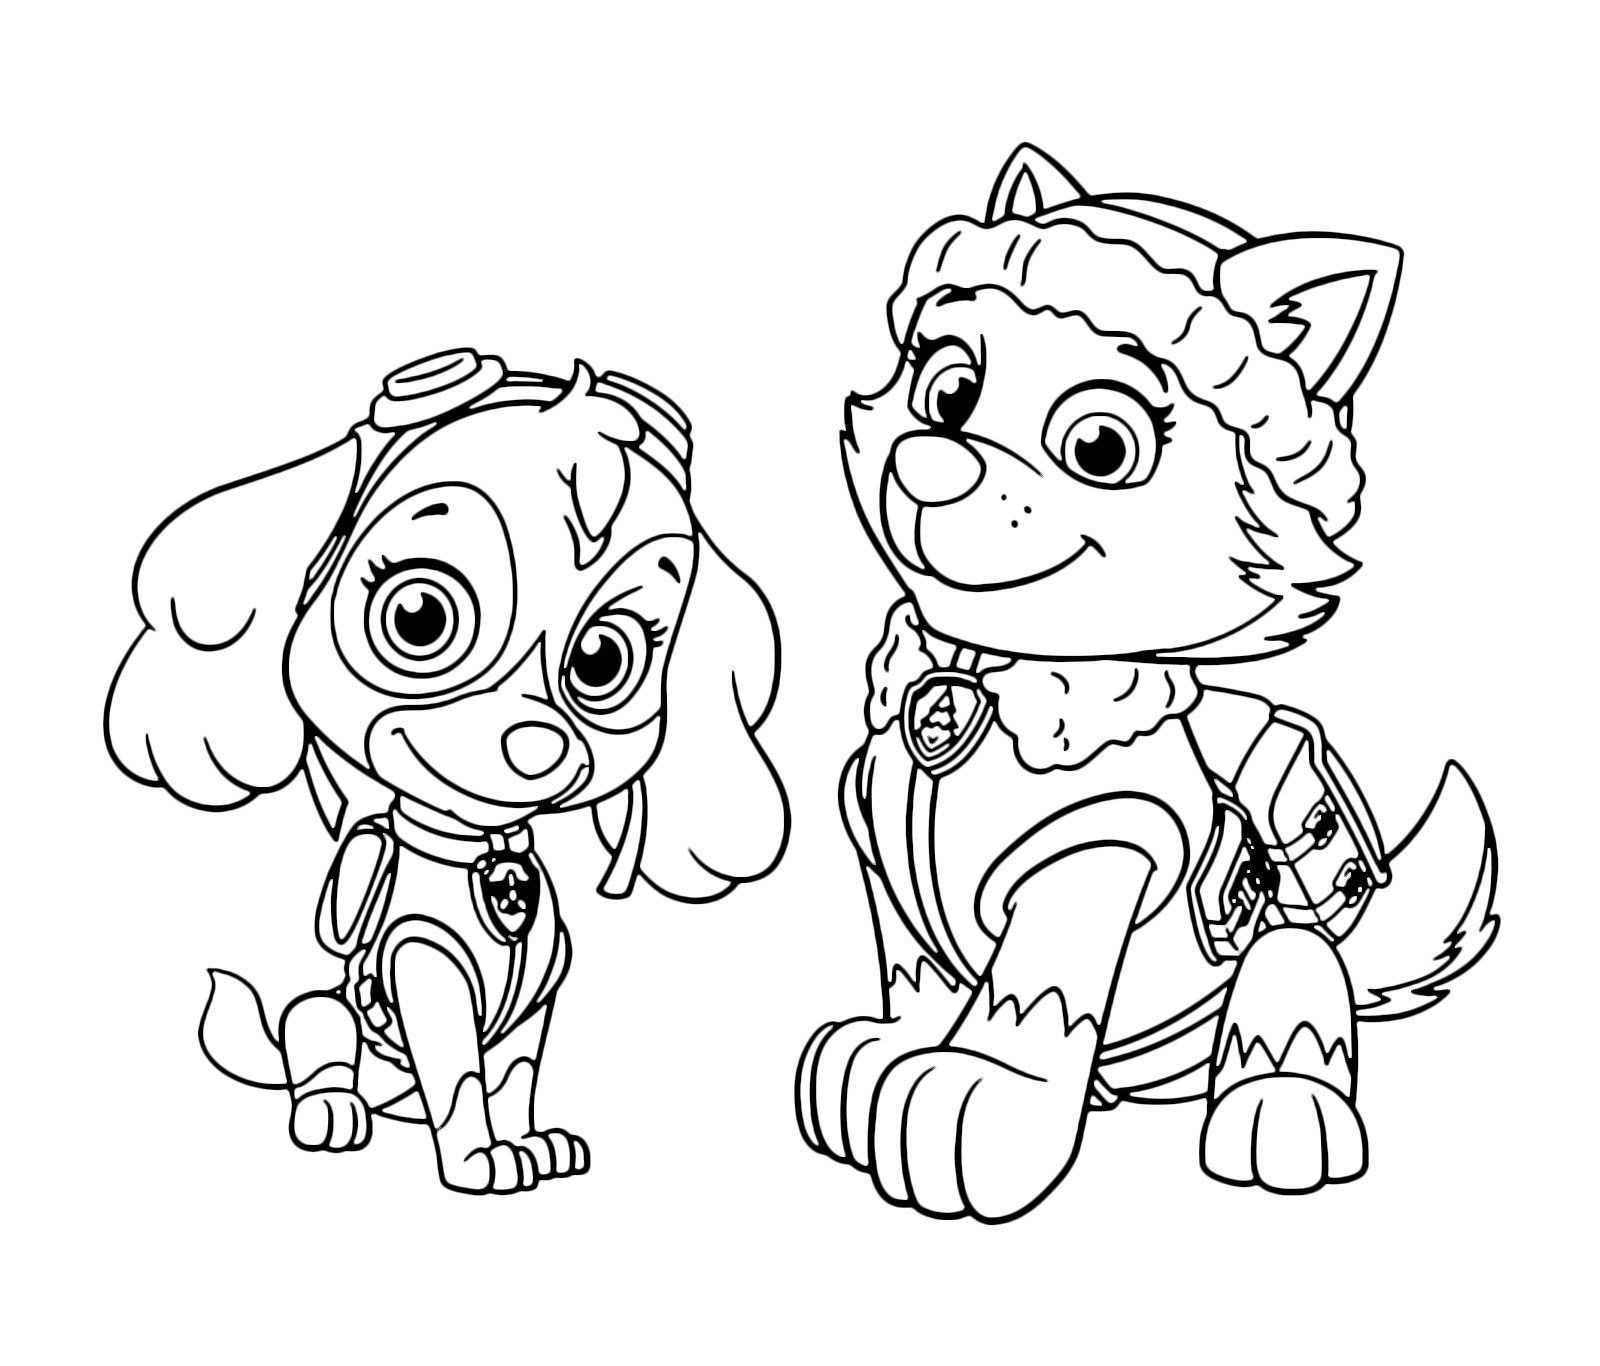 Zuma Coloring Pages New Paw Patrol Rocky Skye And Page Inside Free Paw Patrol Coloring Pages Paw Patrol Coloring Skye Paw